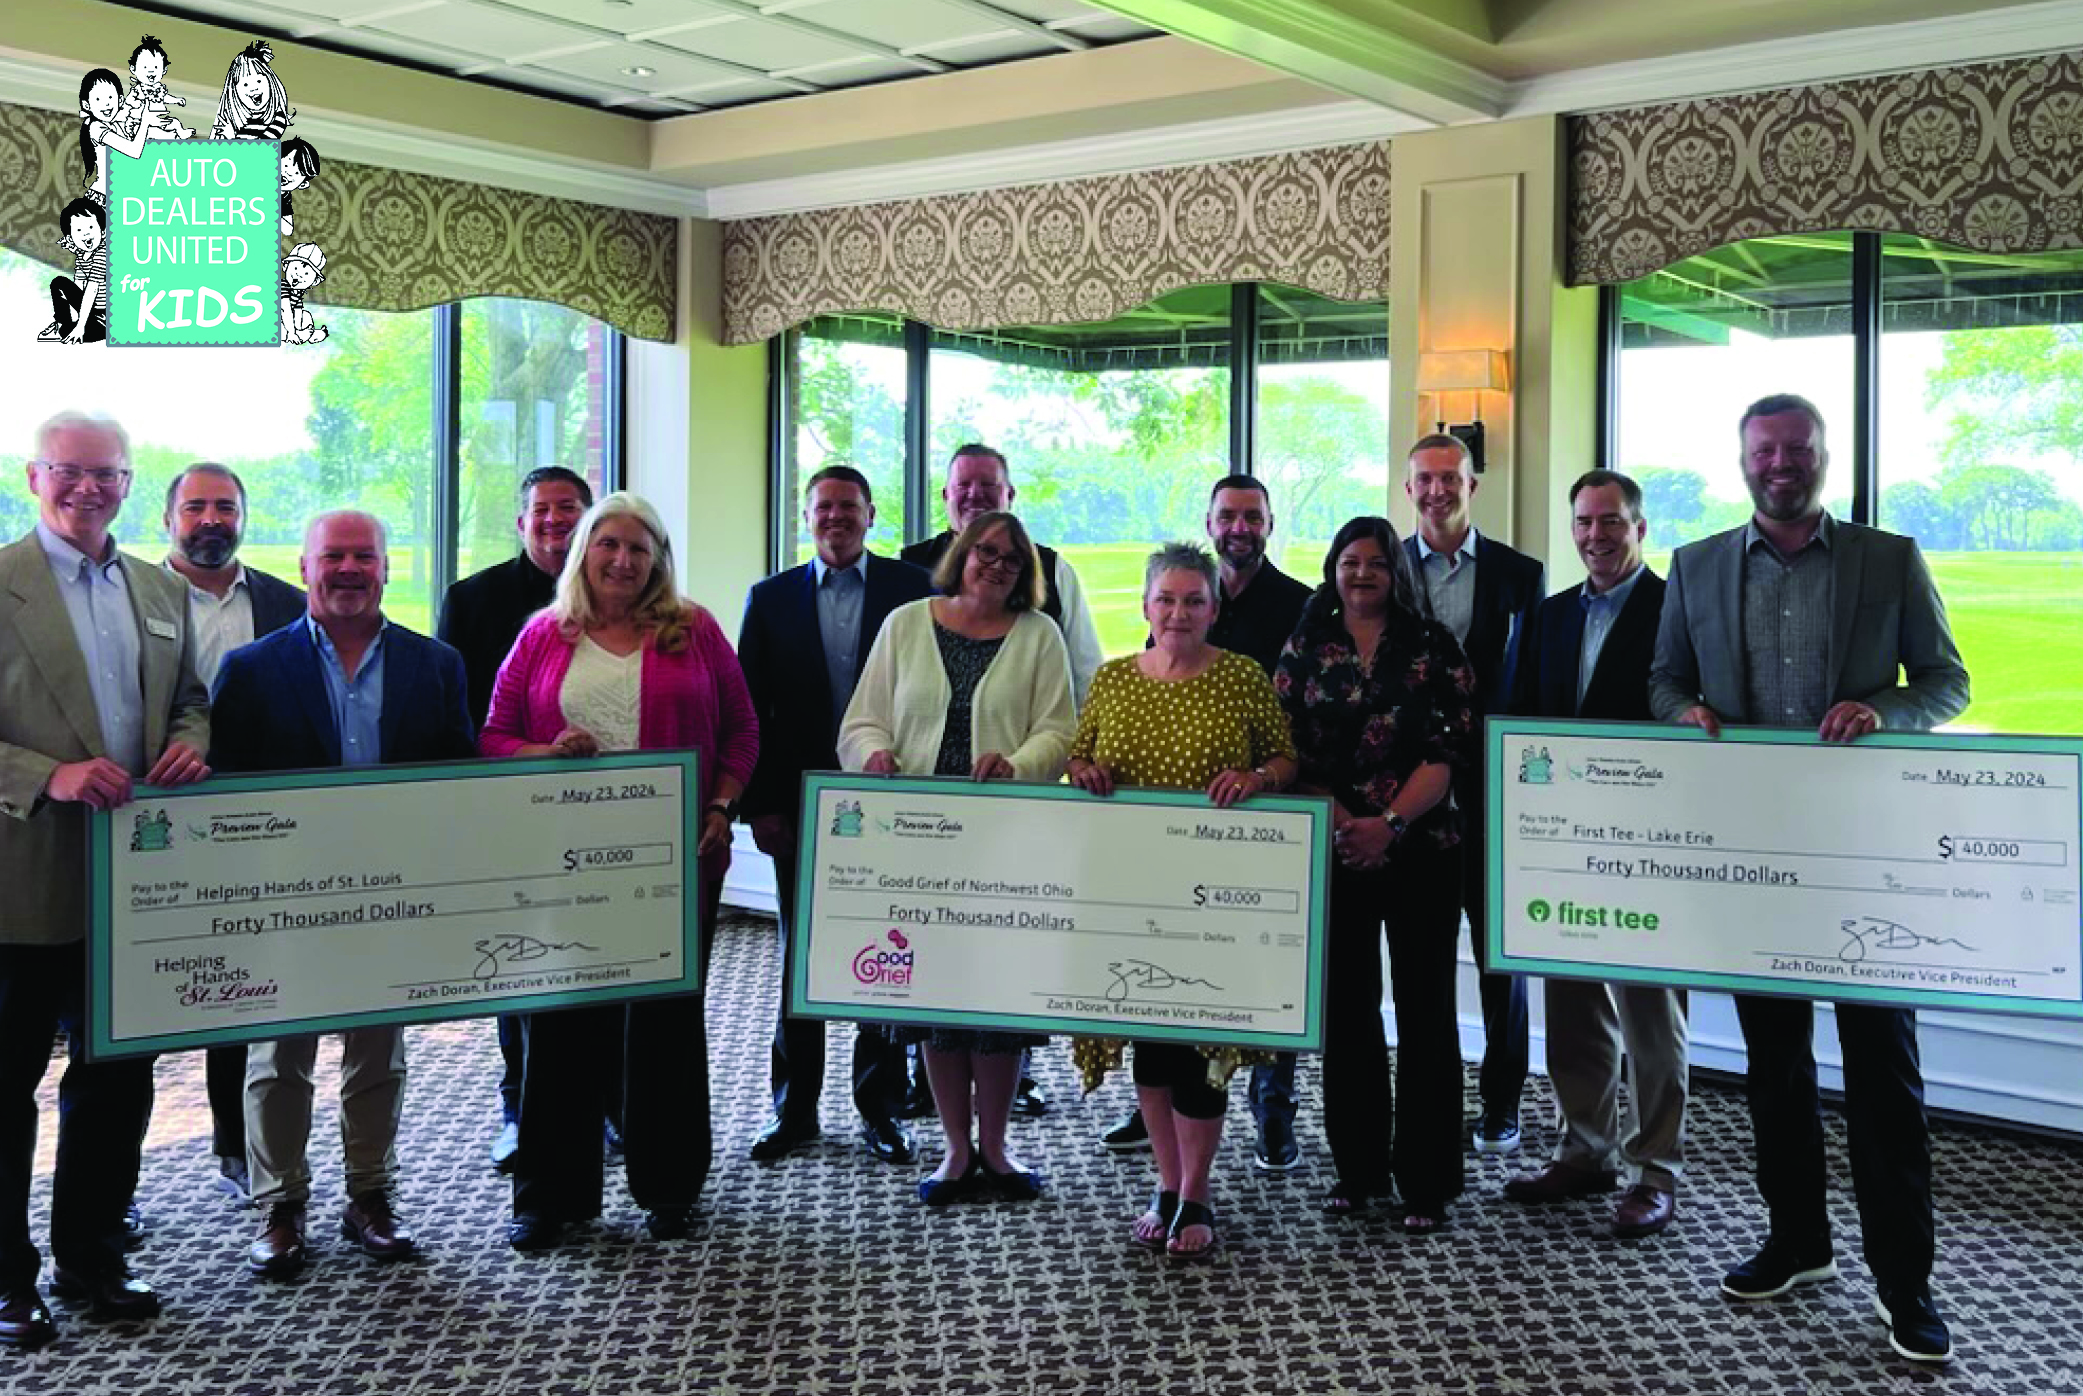 Auto Dealers United for Kids Donated $120,000 to Local Charities